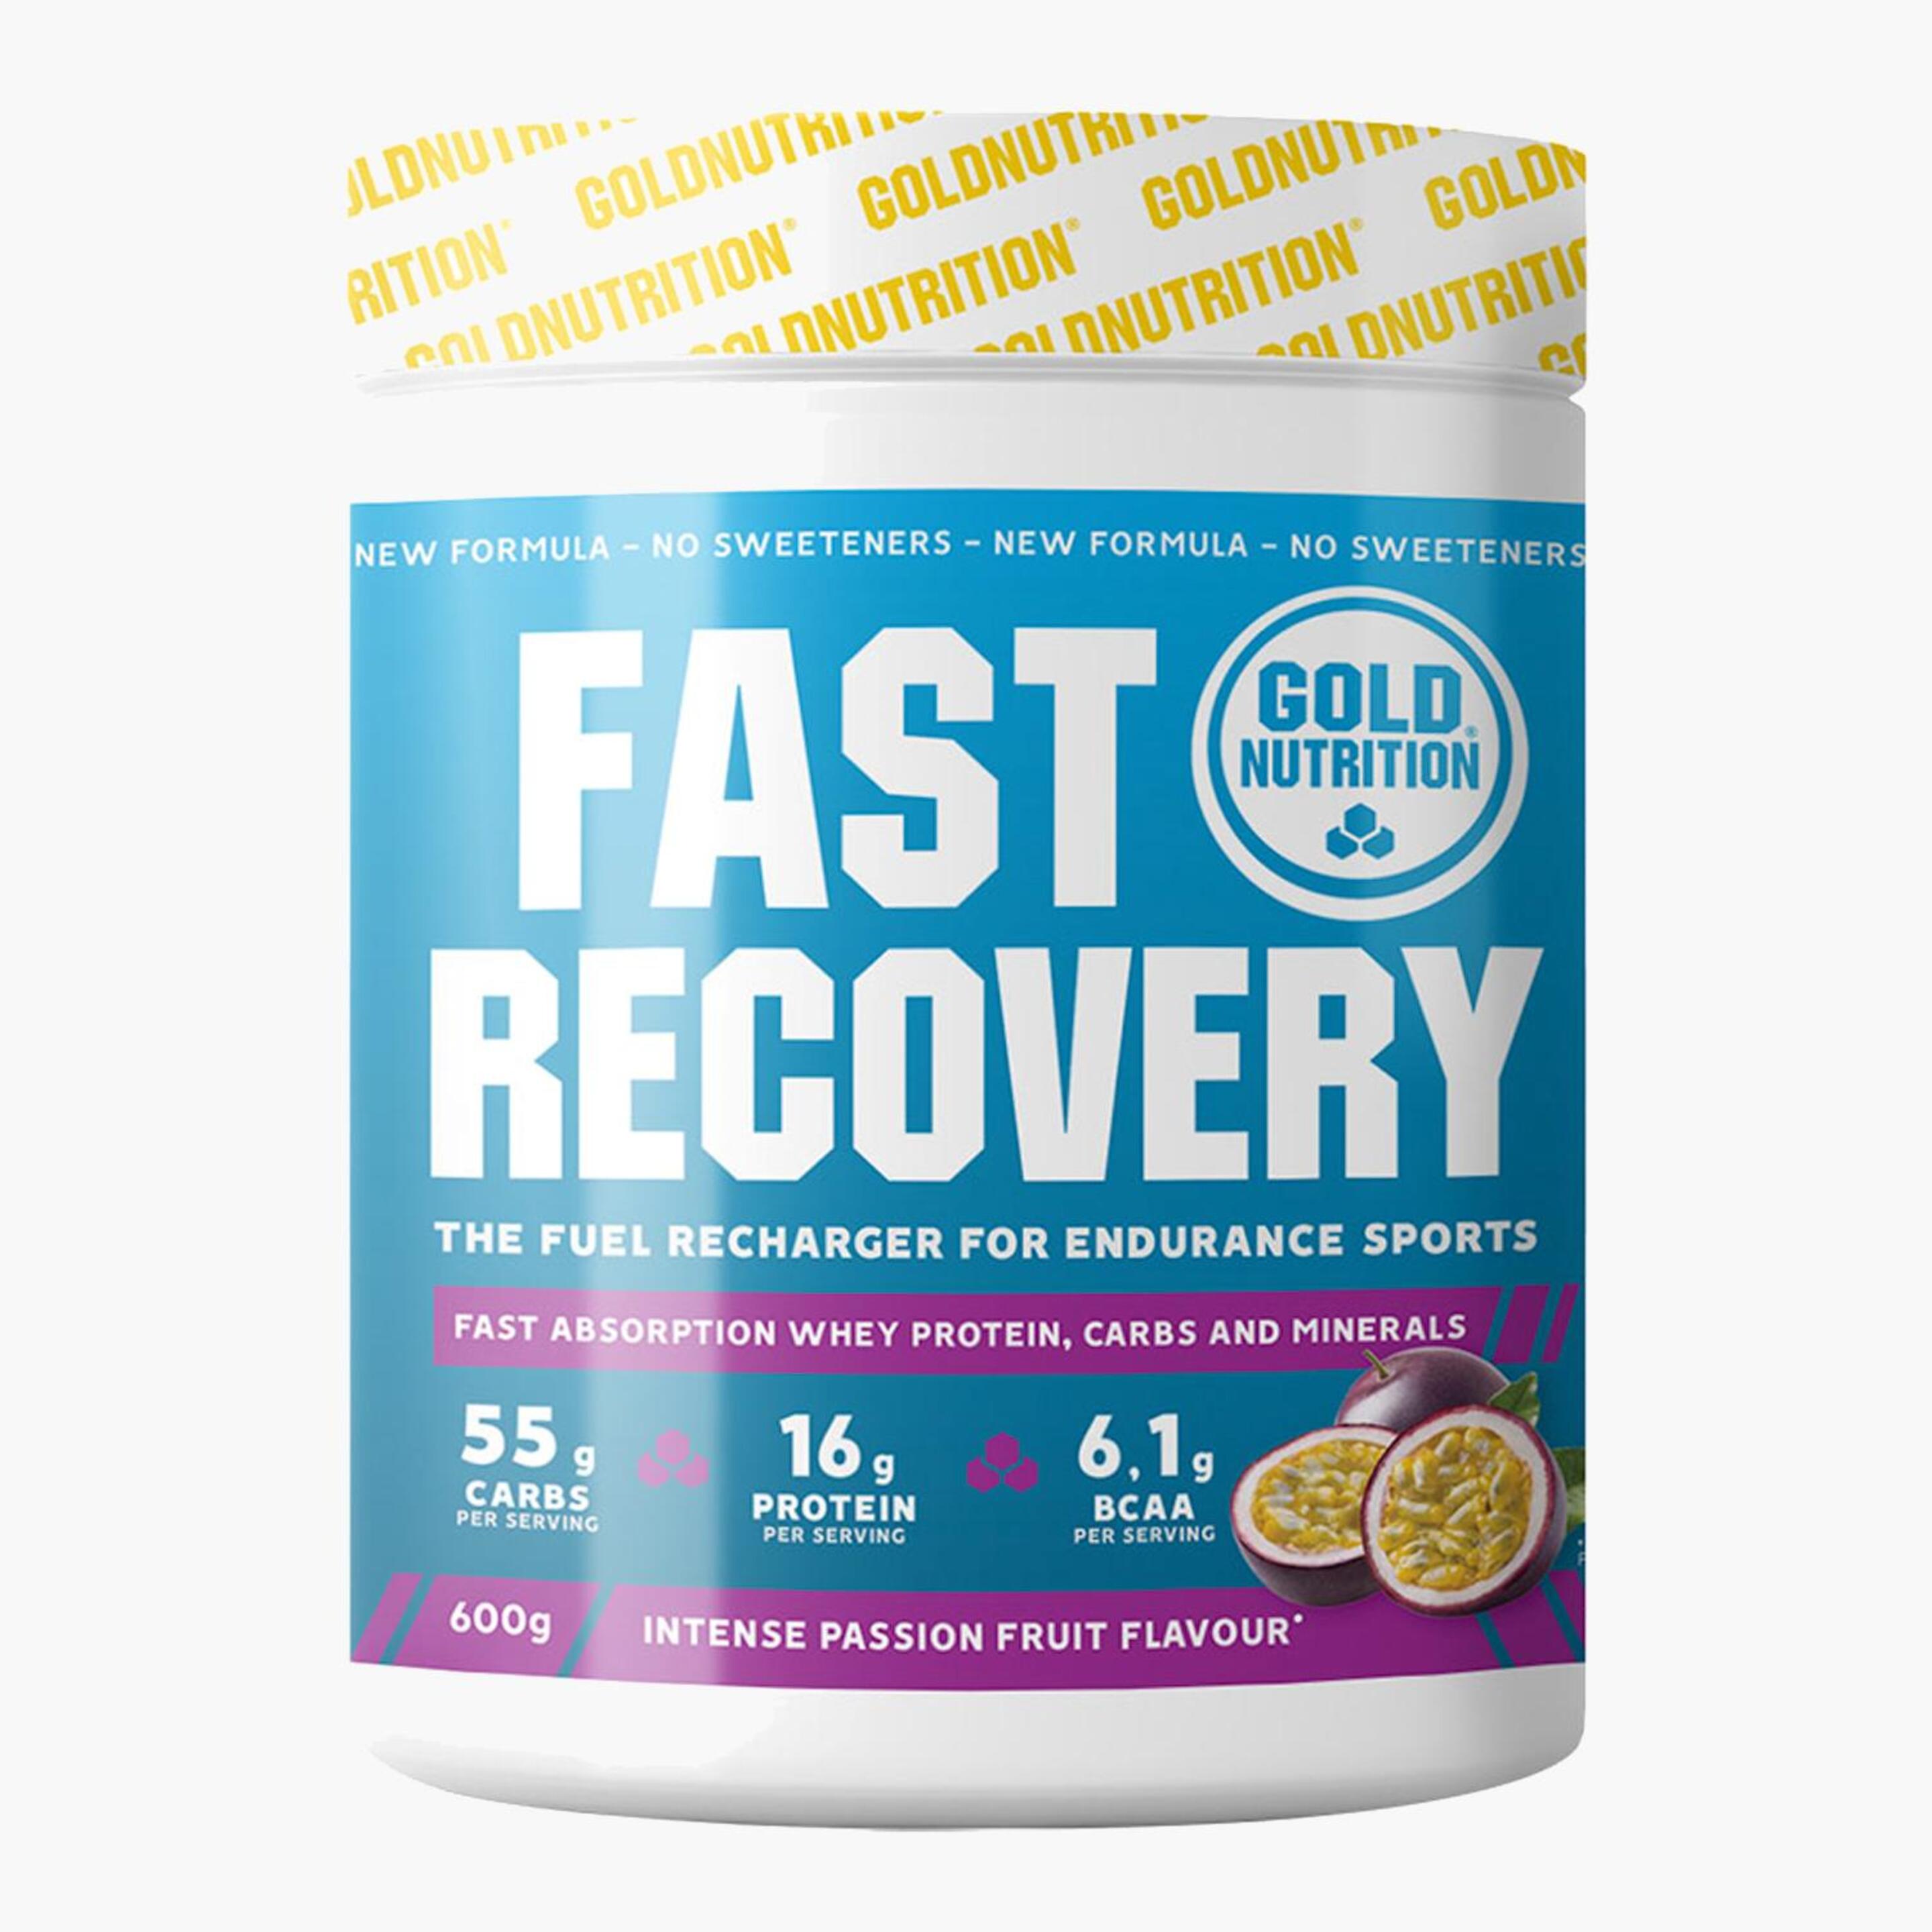 Gold Nutrition Fast Recovery 600g - unico - 